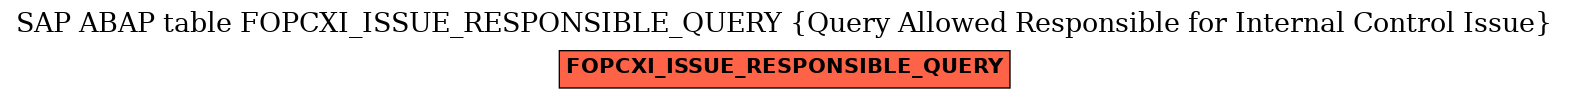 E-R Diagram for table FOPCXI_ISSUE_RESPONSIBLE_QUERY (Query Allowed Responsible for Internal Control Issue)